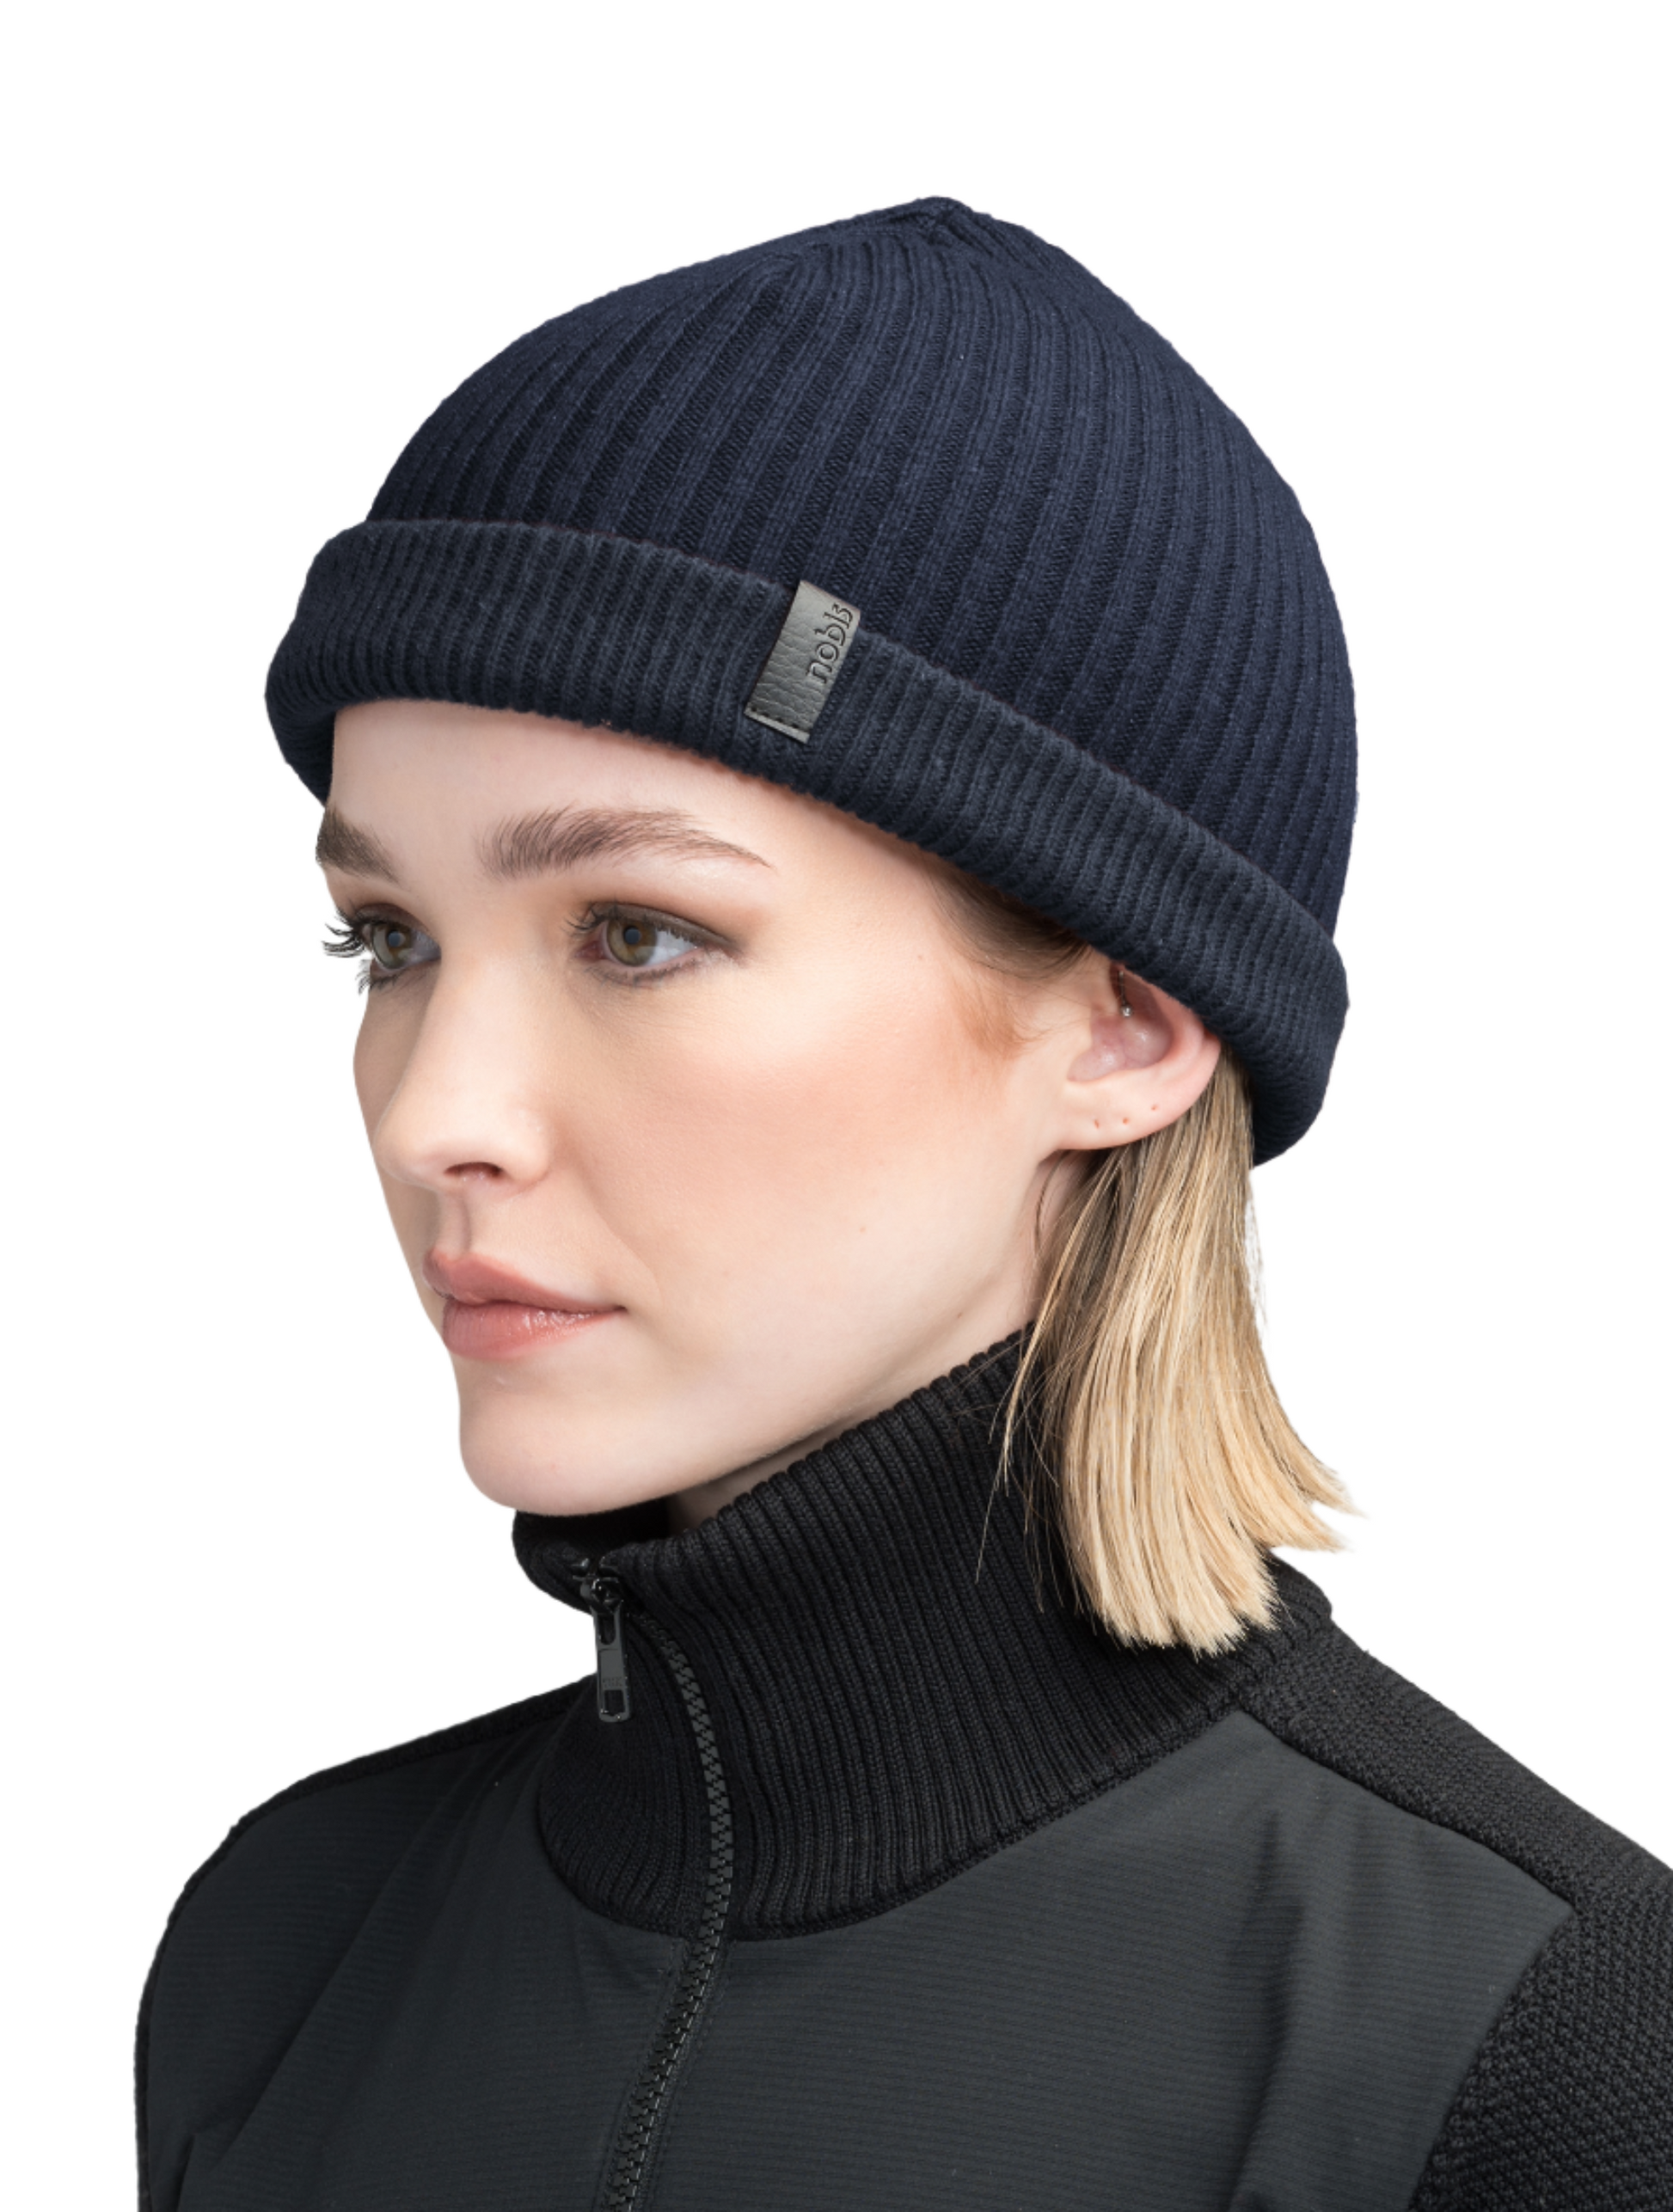 Ardn Unisex Tailored Reversible Knit Beanie in an extra fine merino wool blend, fitted rib knit, and reversible design, in Navy/Wheat